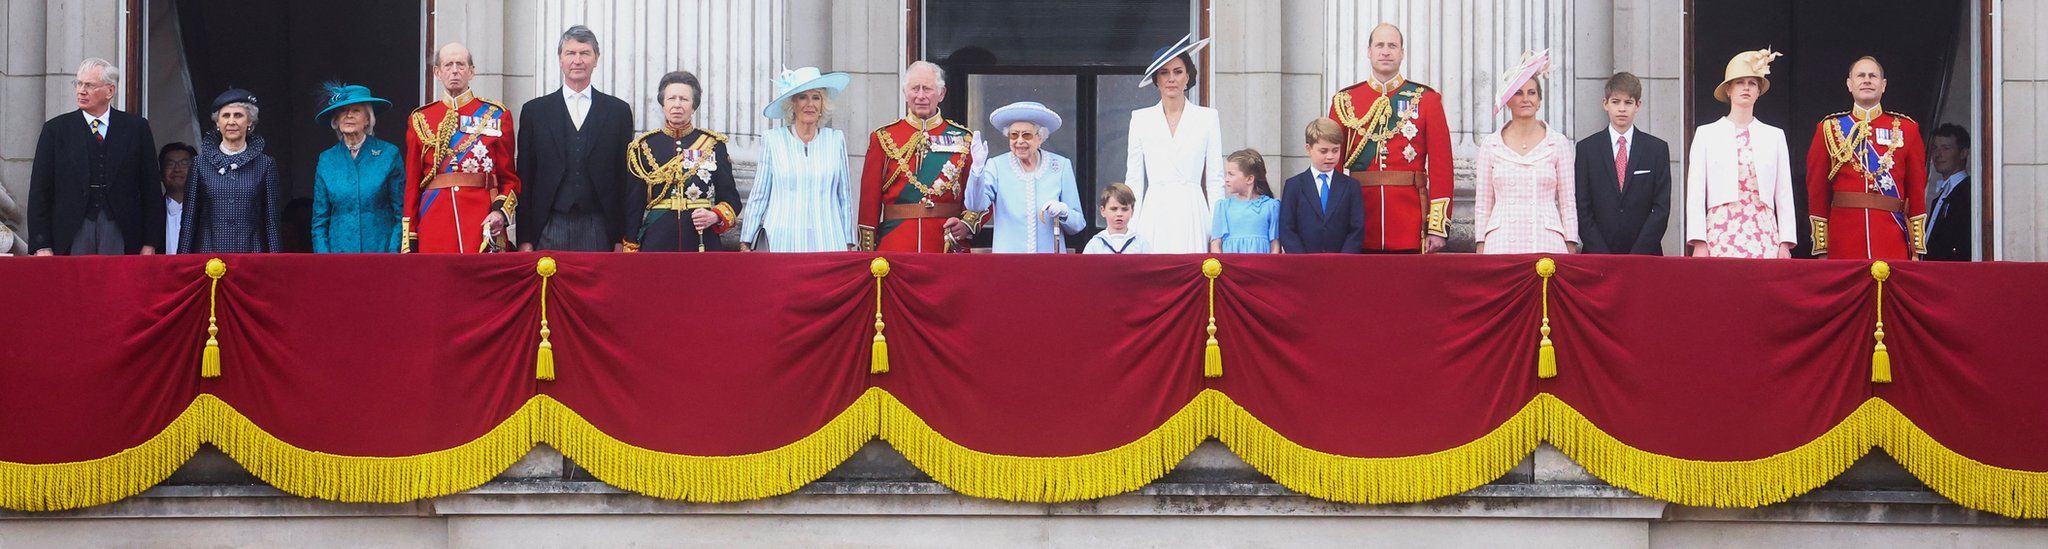 The Queen flanked by 17 other senior royals on the balcony